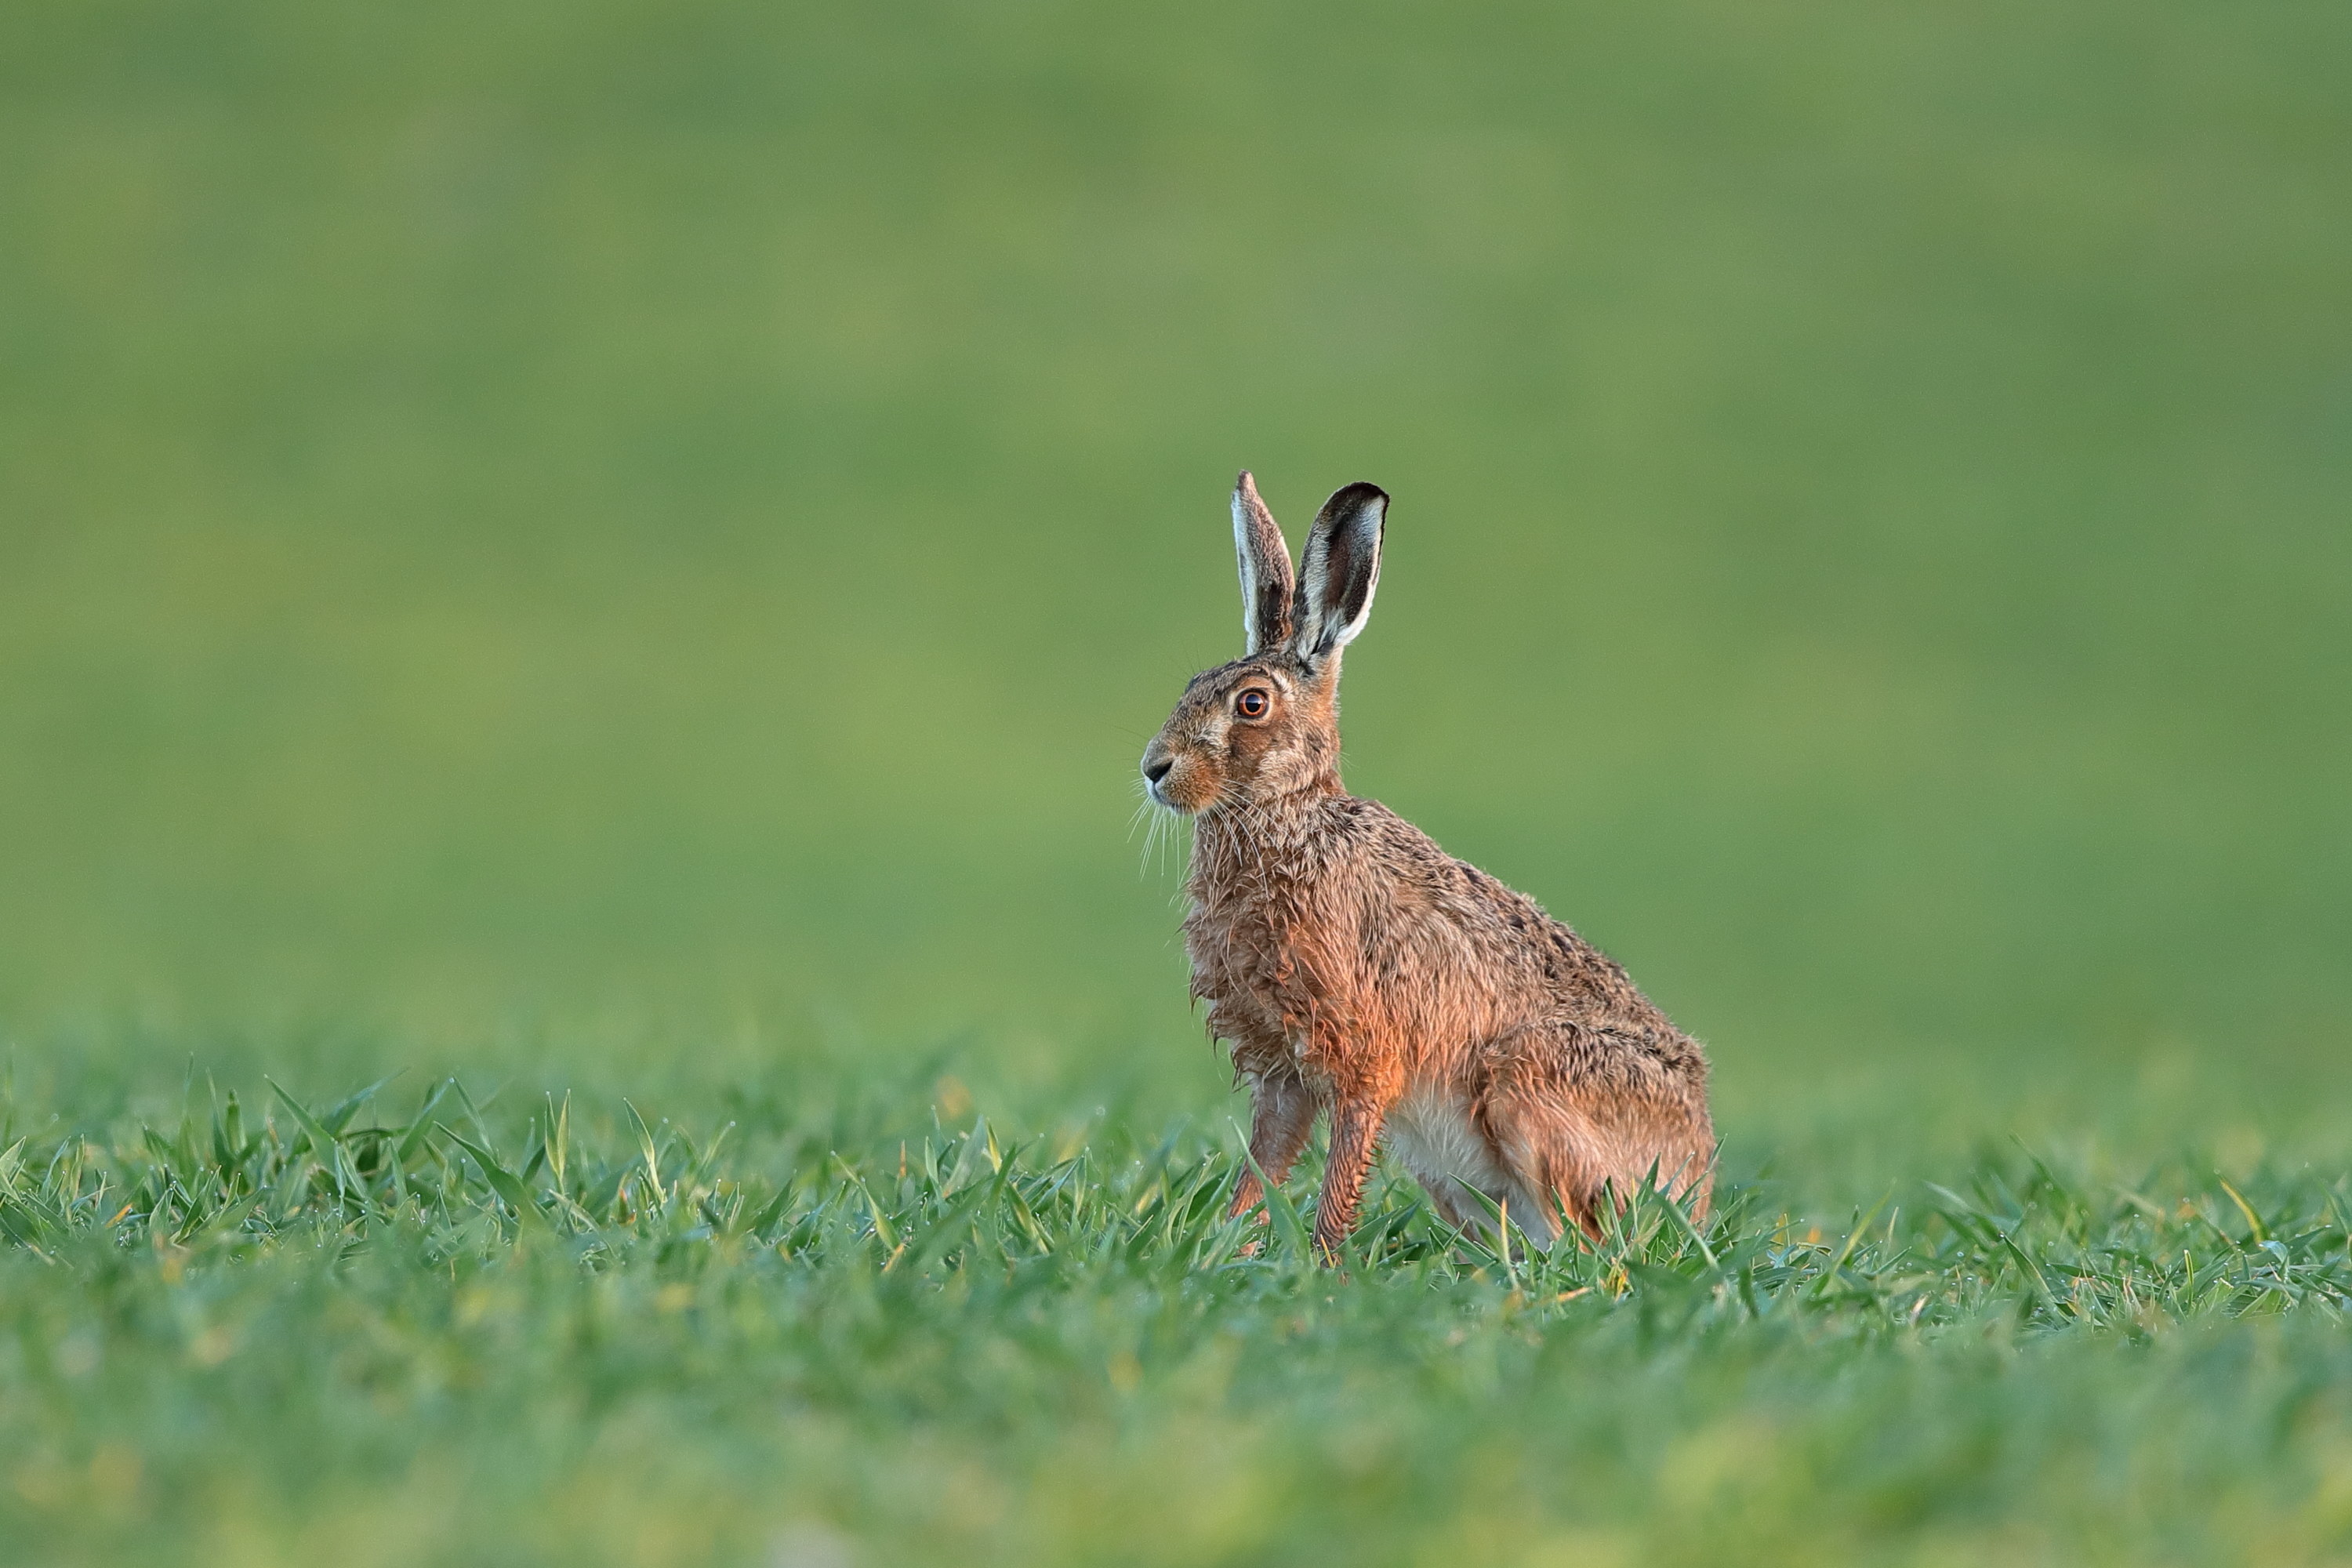 A rabbit standing in the grass